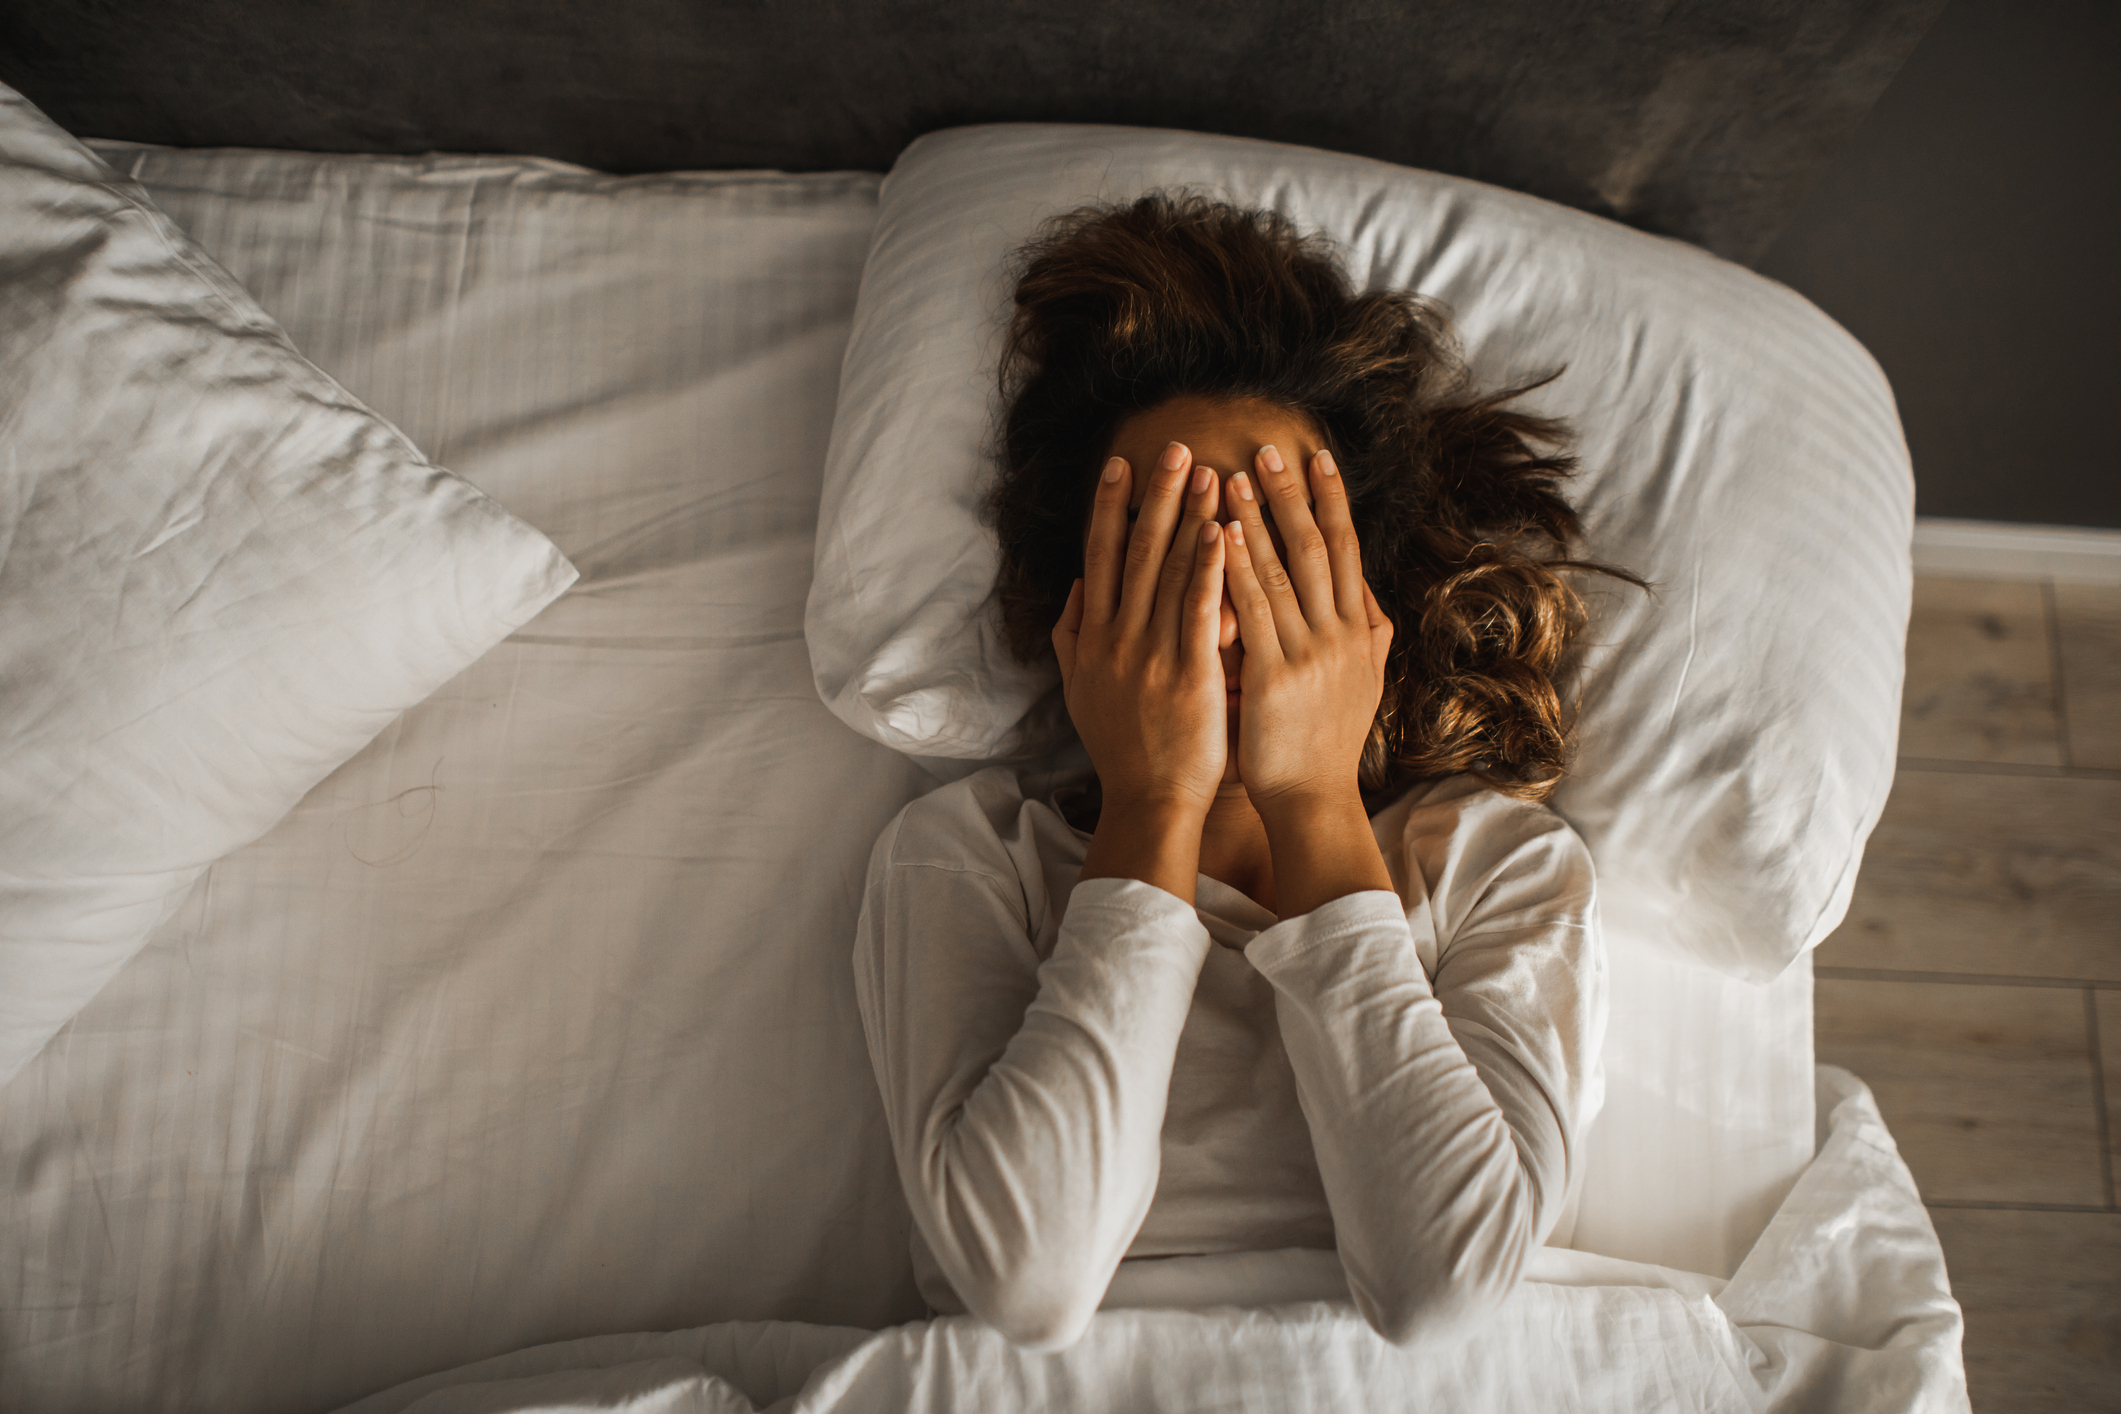 A woman looking exhausted in bed